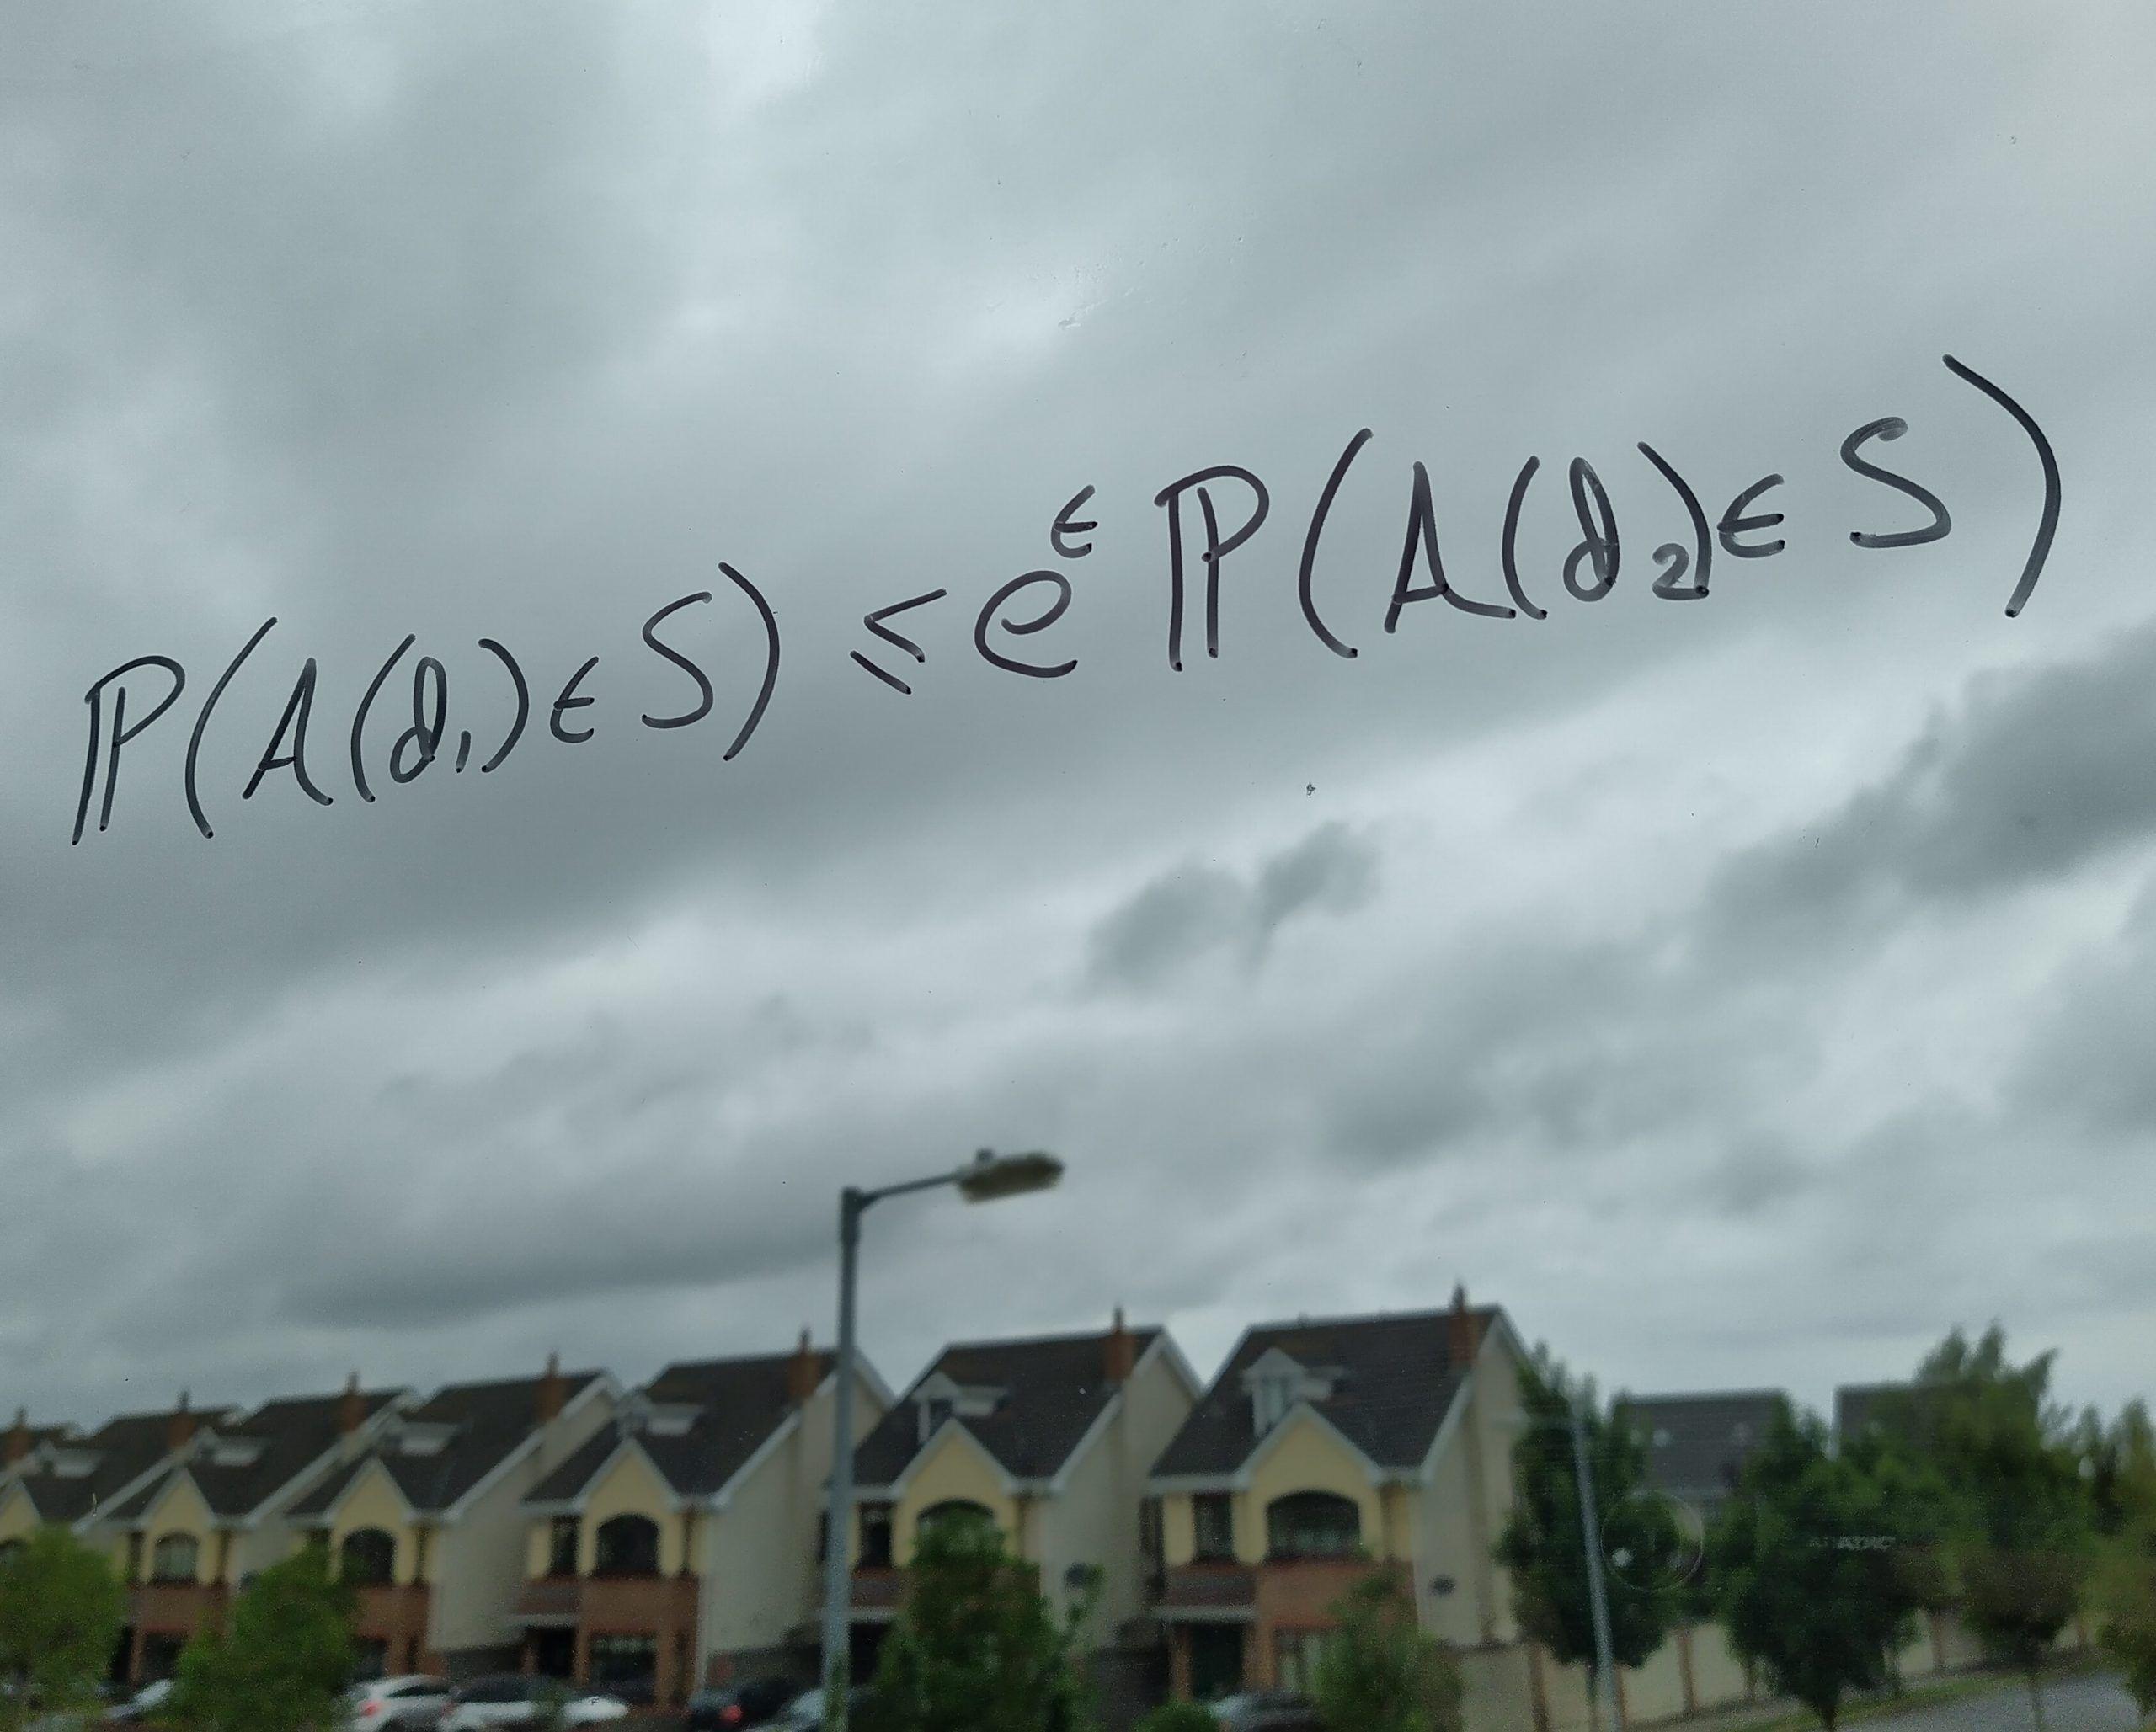 A photo of the equation written in marker on a window.